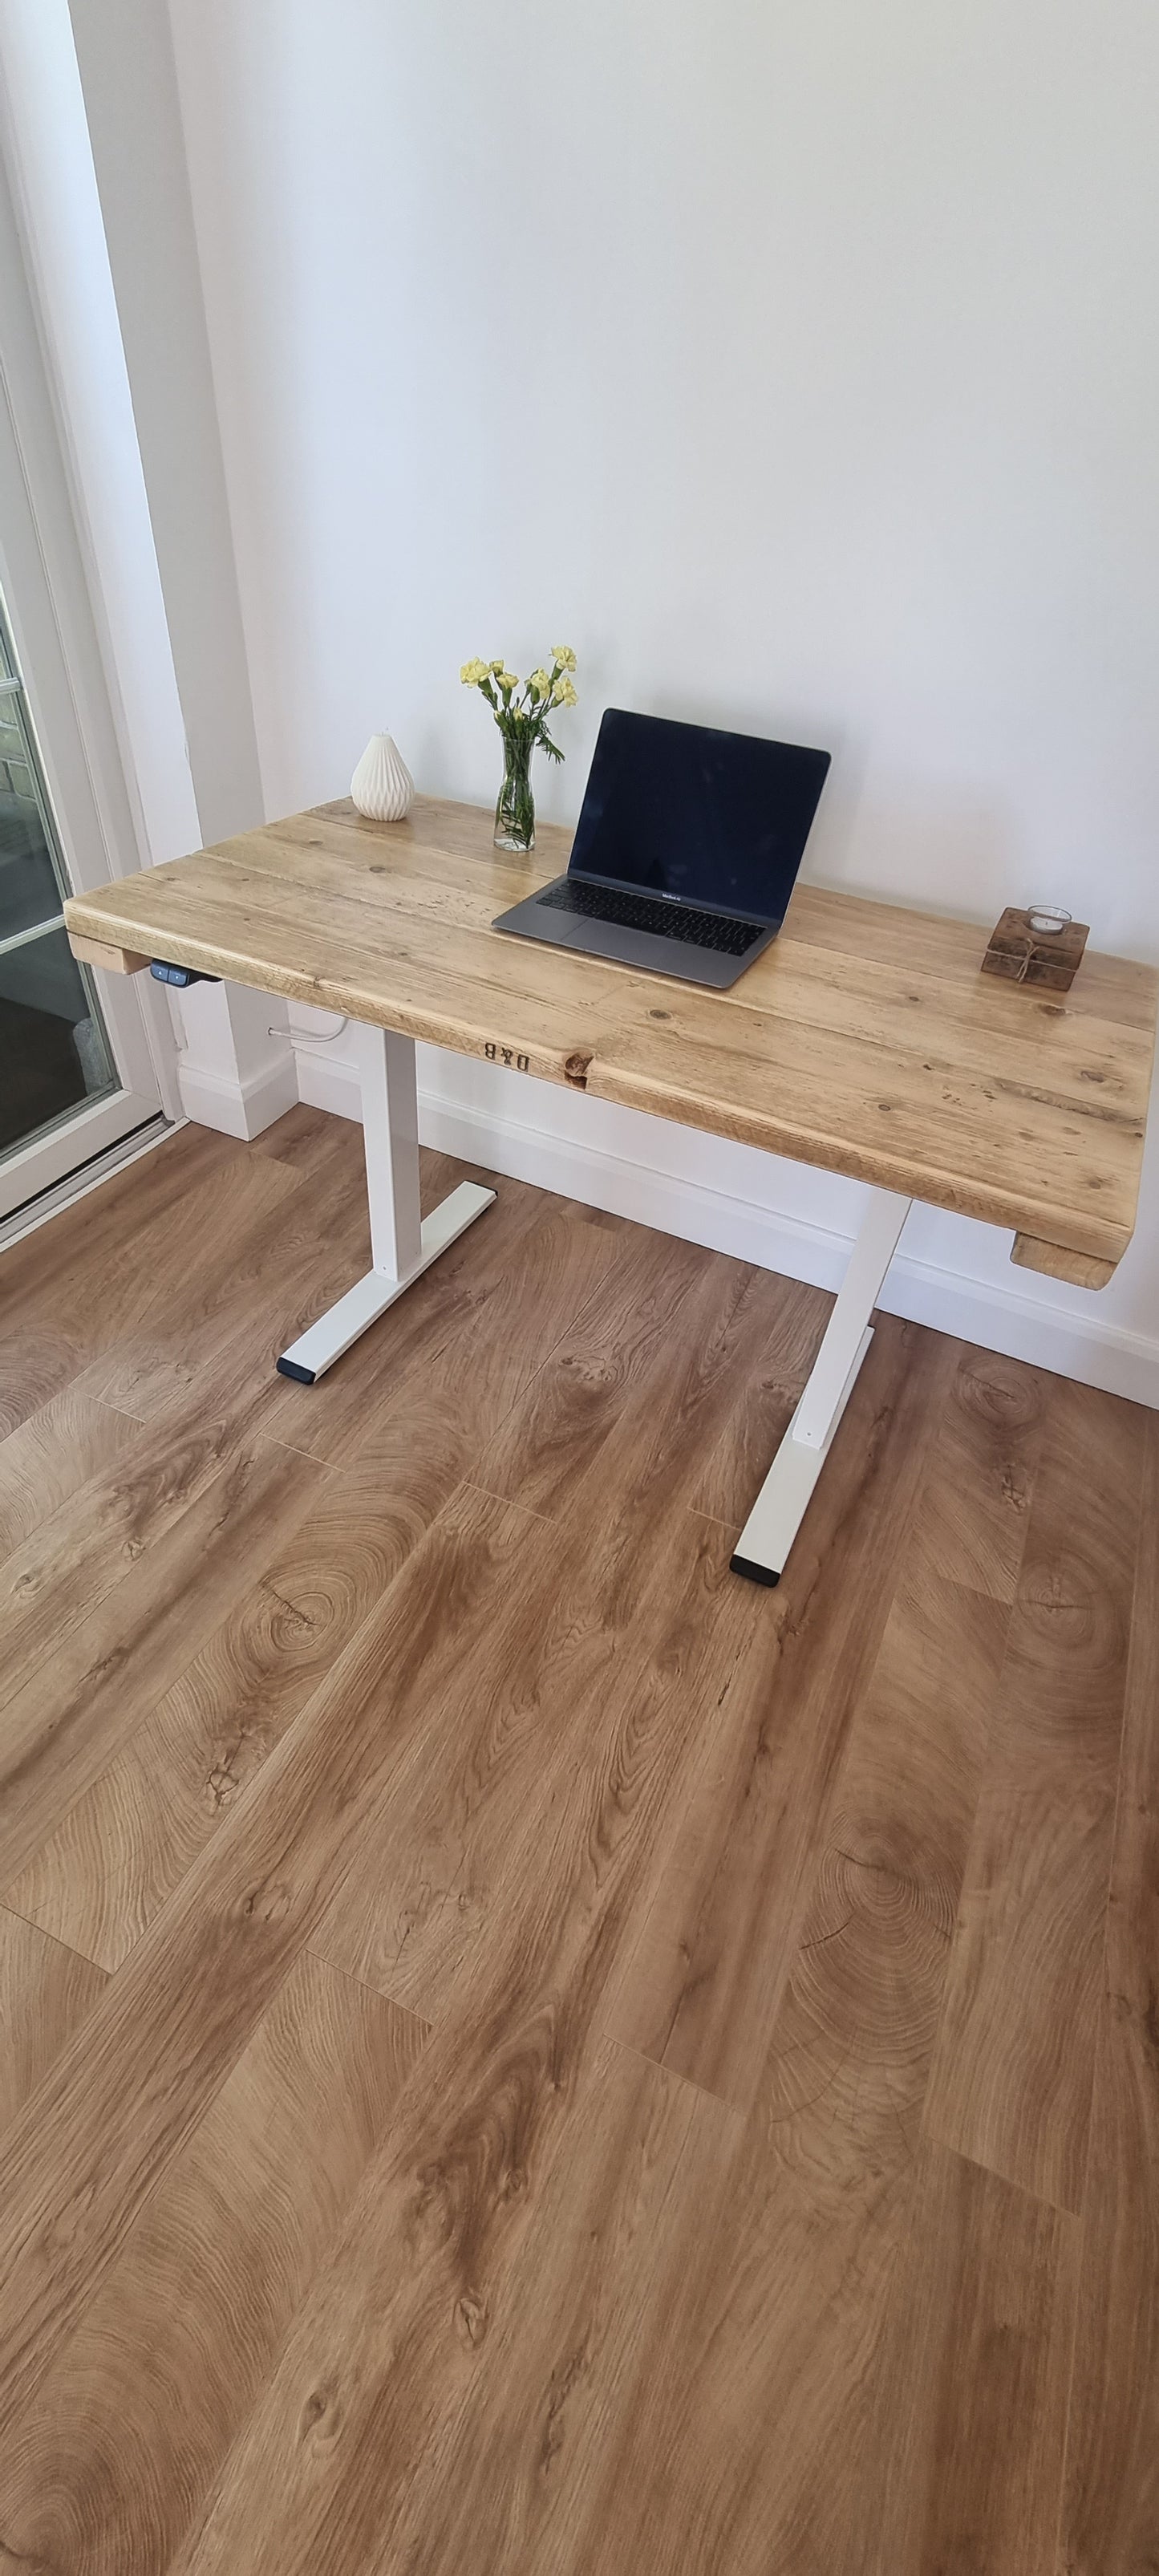 Reclaimed wood sit/stand desk